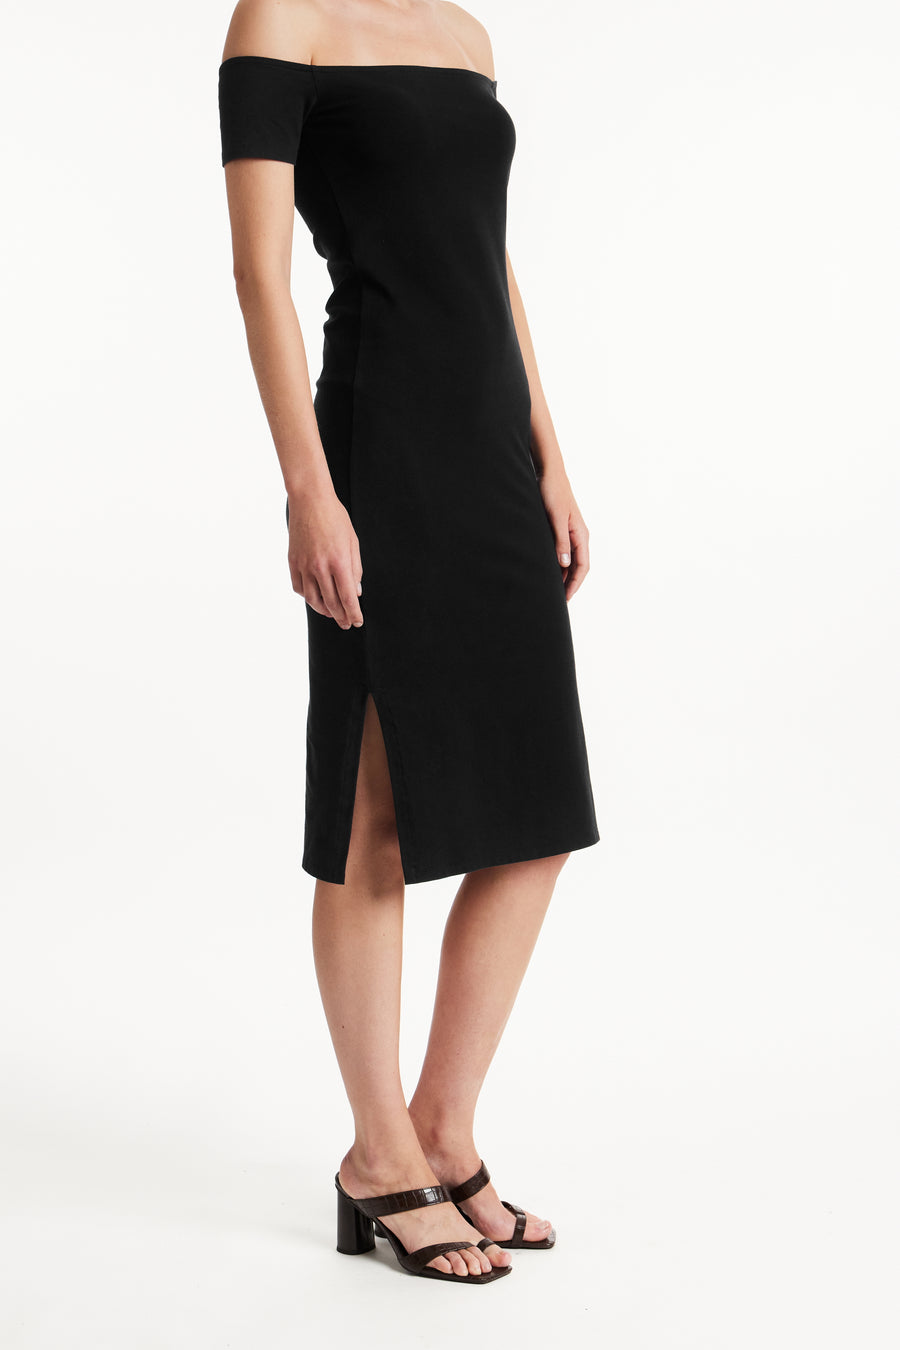 People Tree Fair Trade, Ethical & Sustainable Emer Dress in Black 95% organic certified cotton, 5% elastane